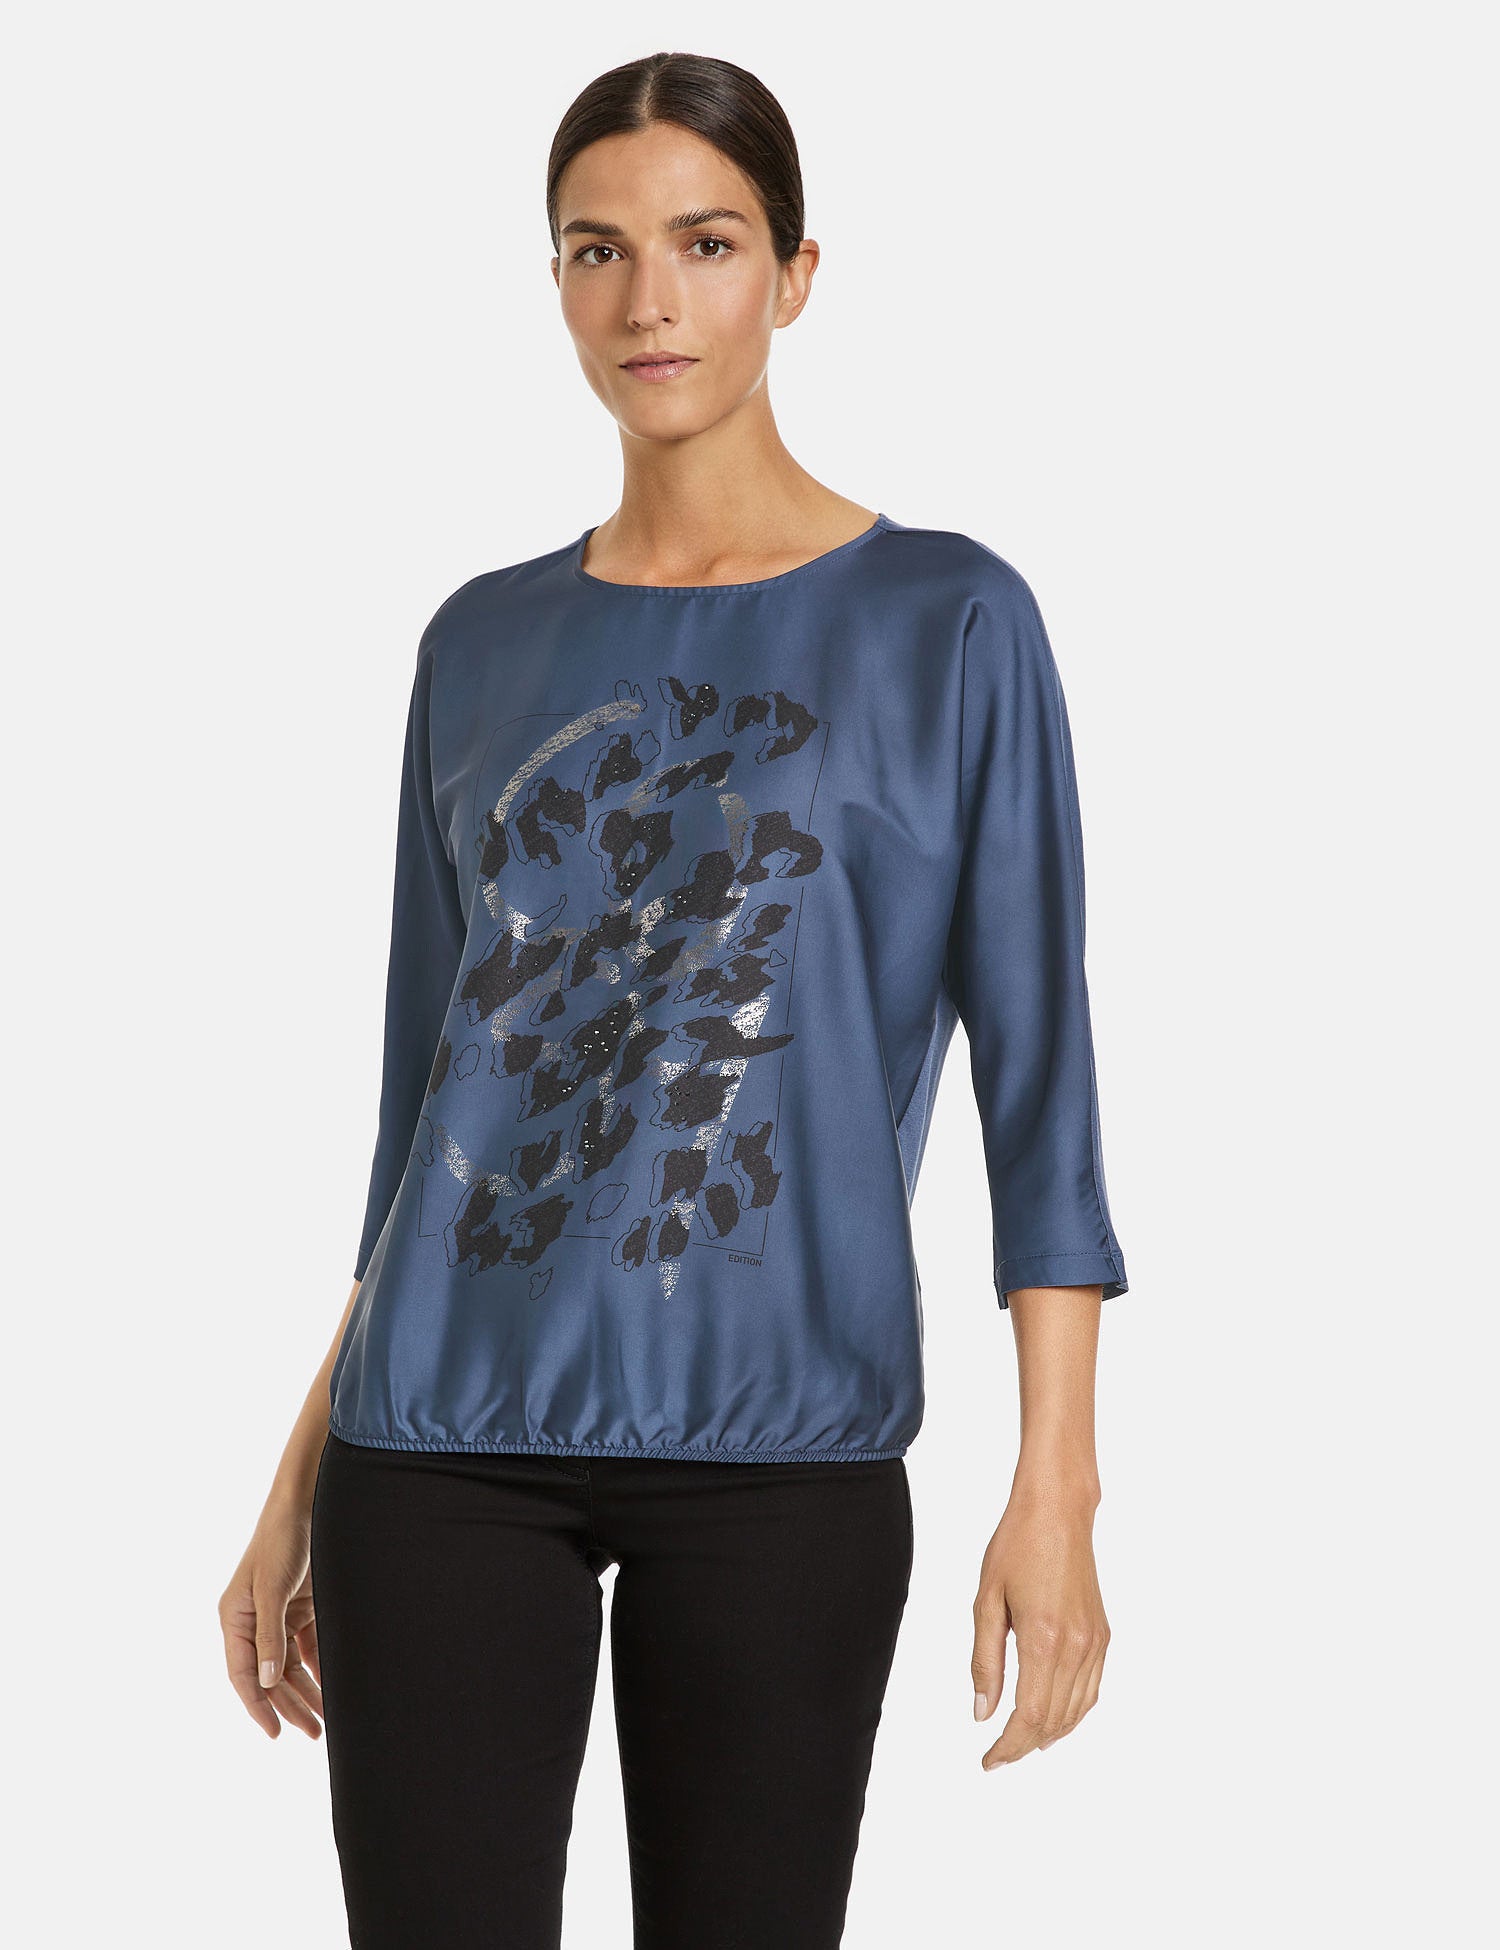 Blouse Top With Fabric Panelling And A Front Print_170095-44002_80929_07